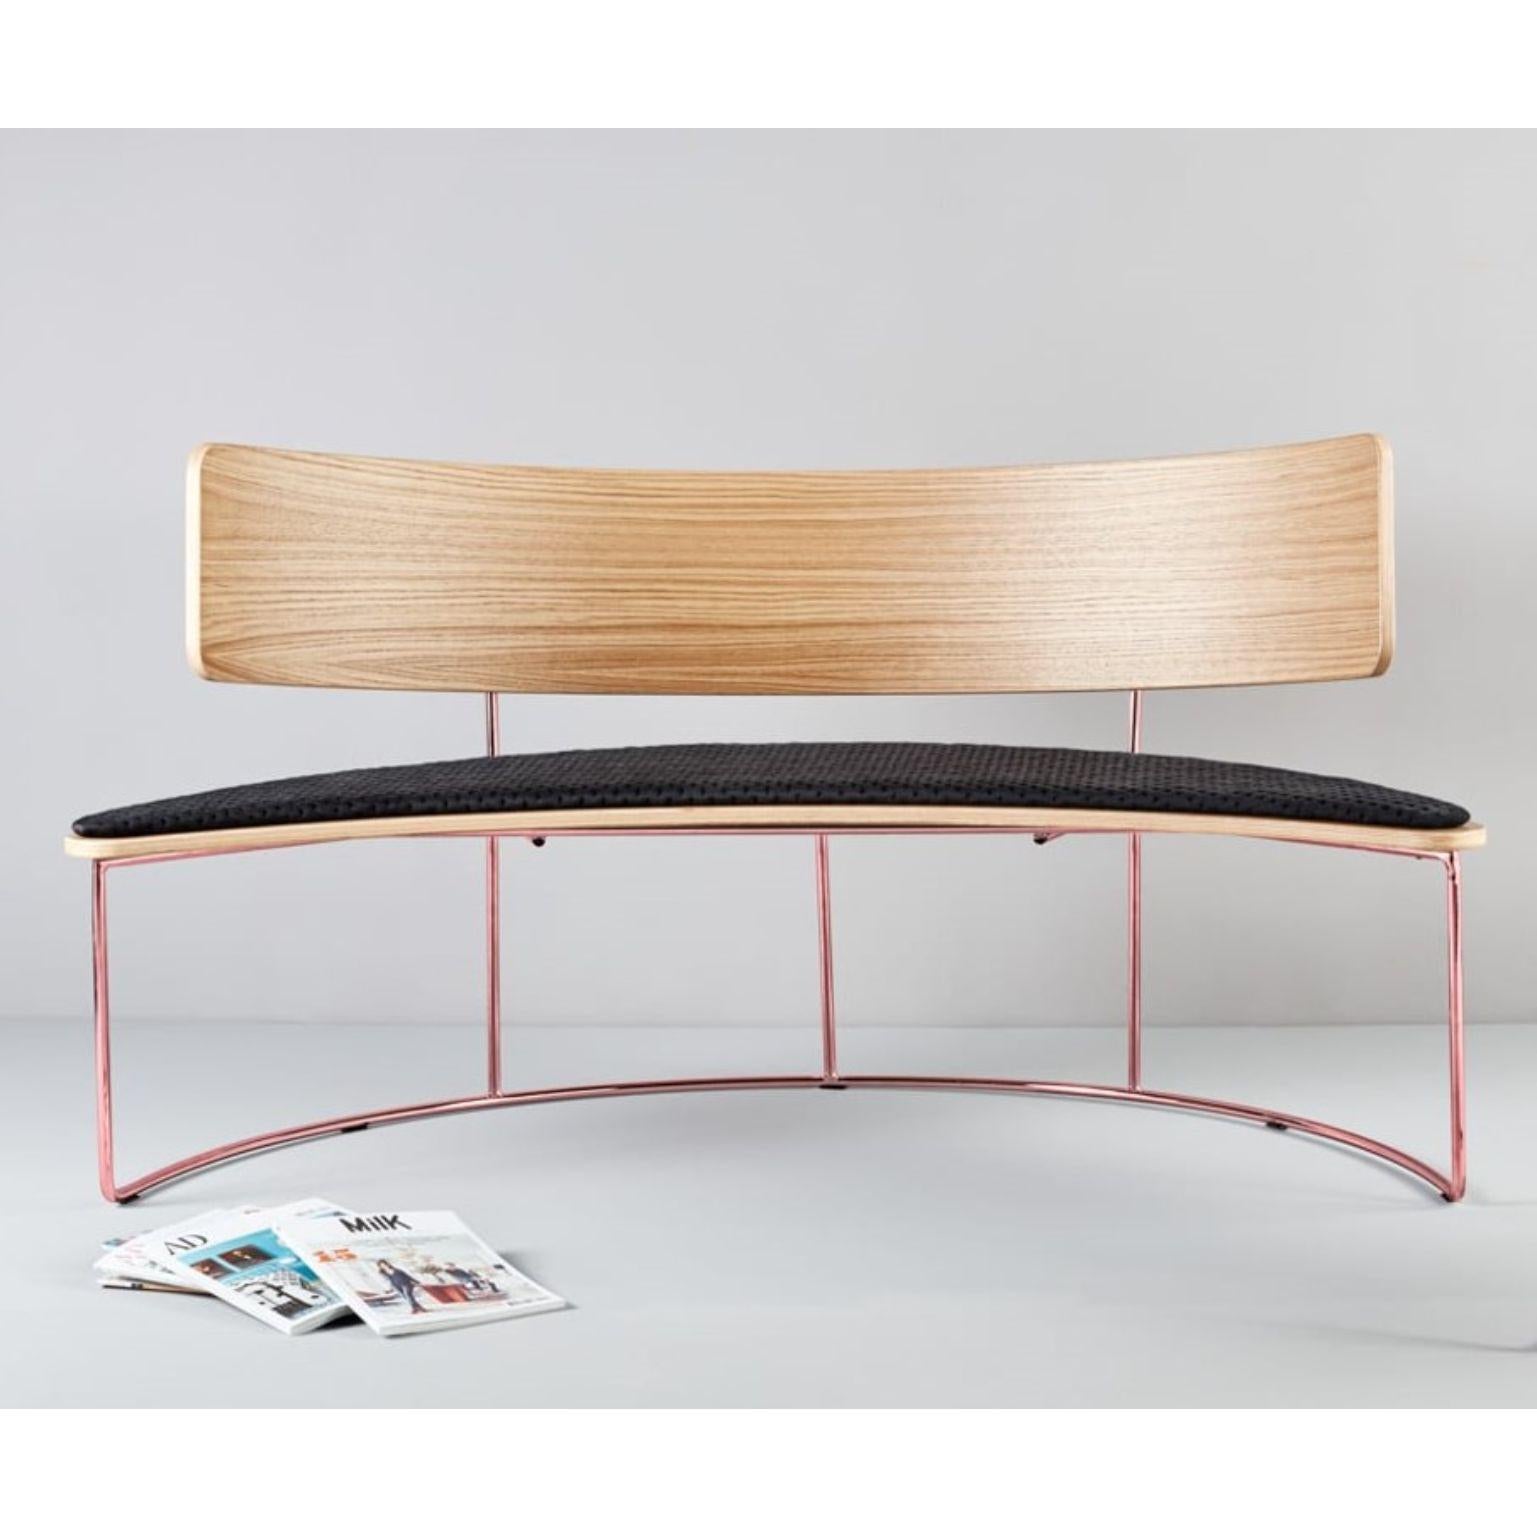 Boomerang bench - black by Cardeoli 
Dimensions: W 152, D 72, H 79, seat 43
Materials: Paint coated iron structure / gold / copper or chromed iron structure
Plywood backrest and seat covered with a natural oak wood layer
Upholstered seat